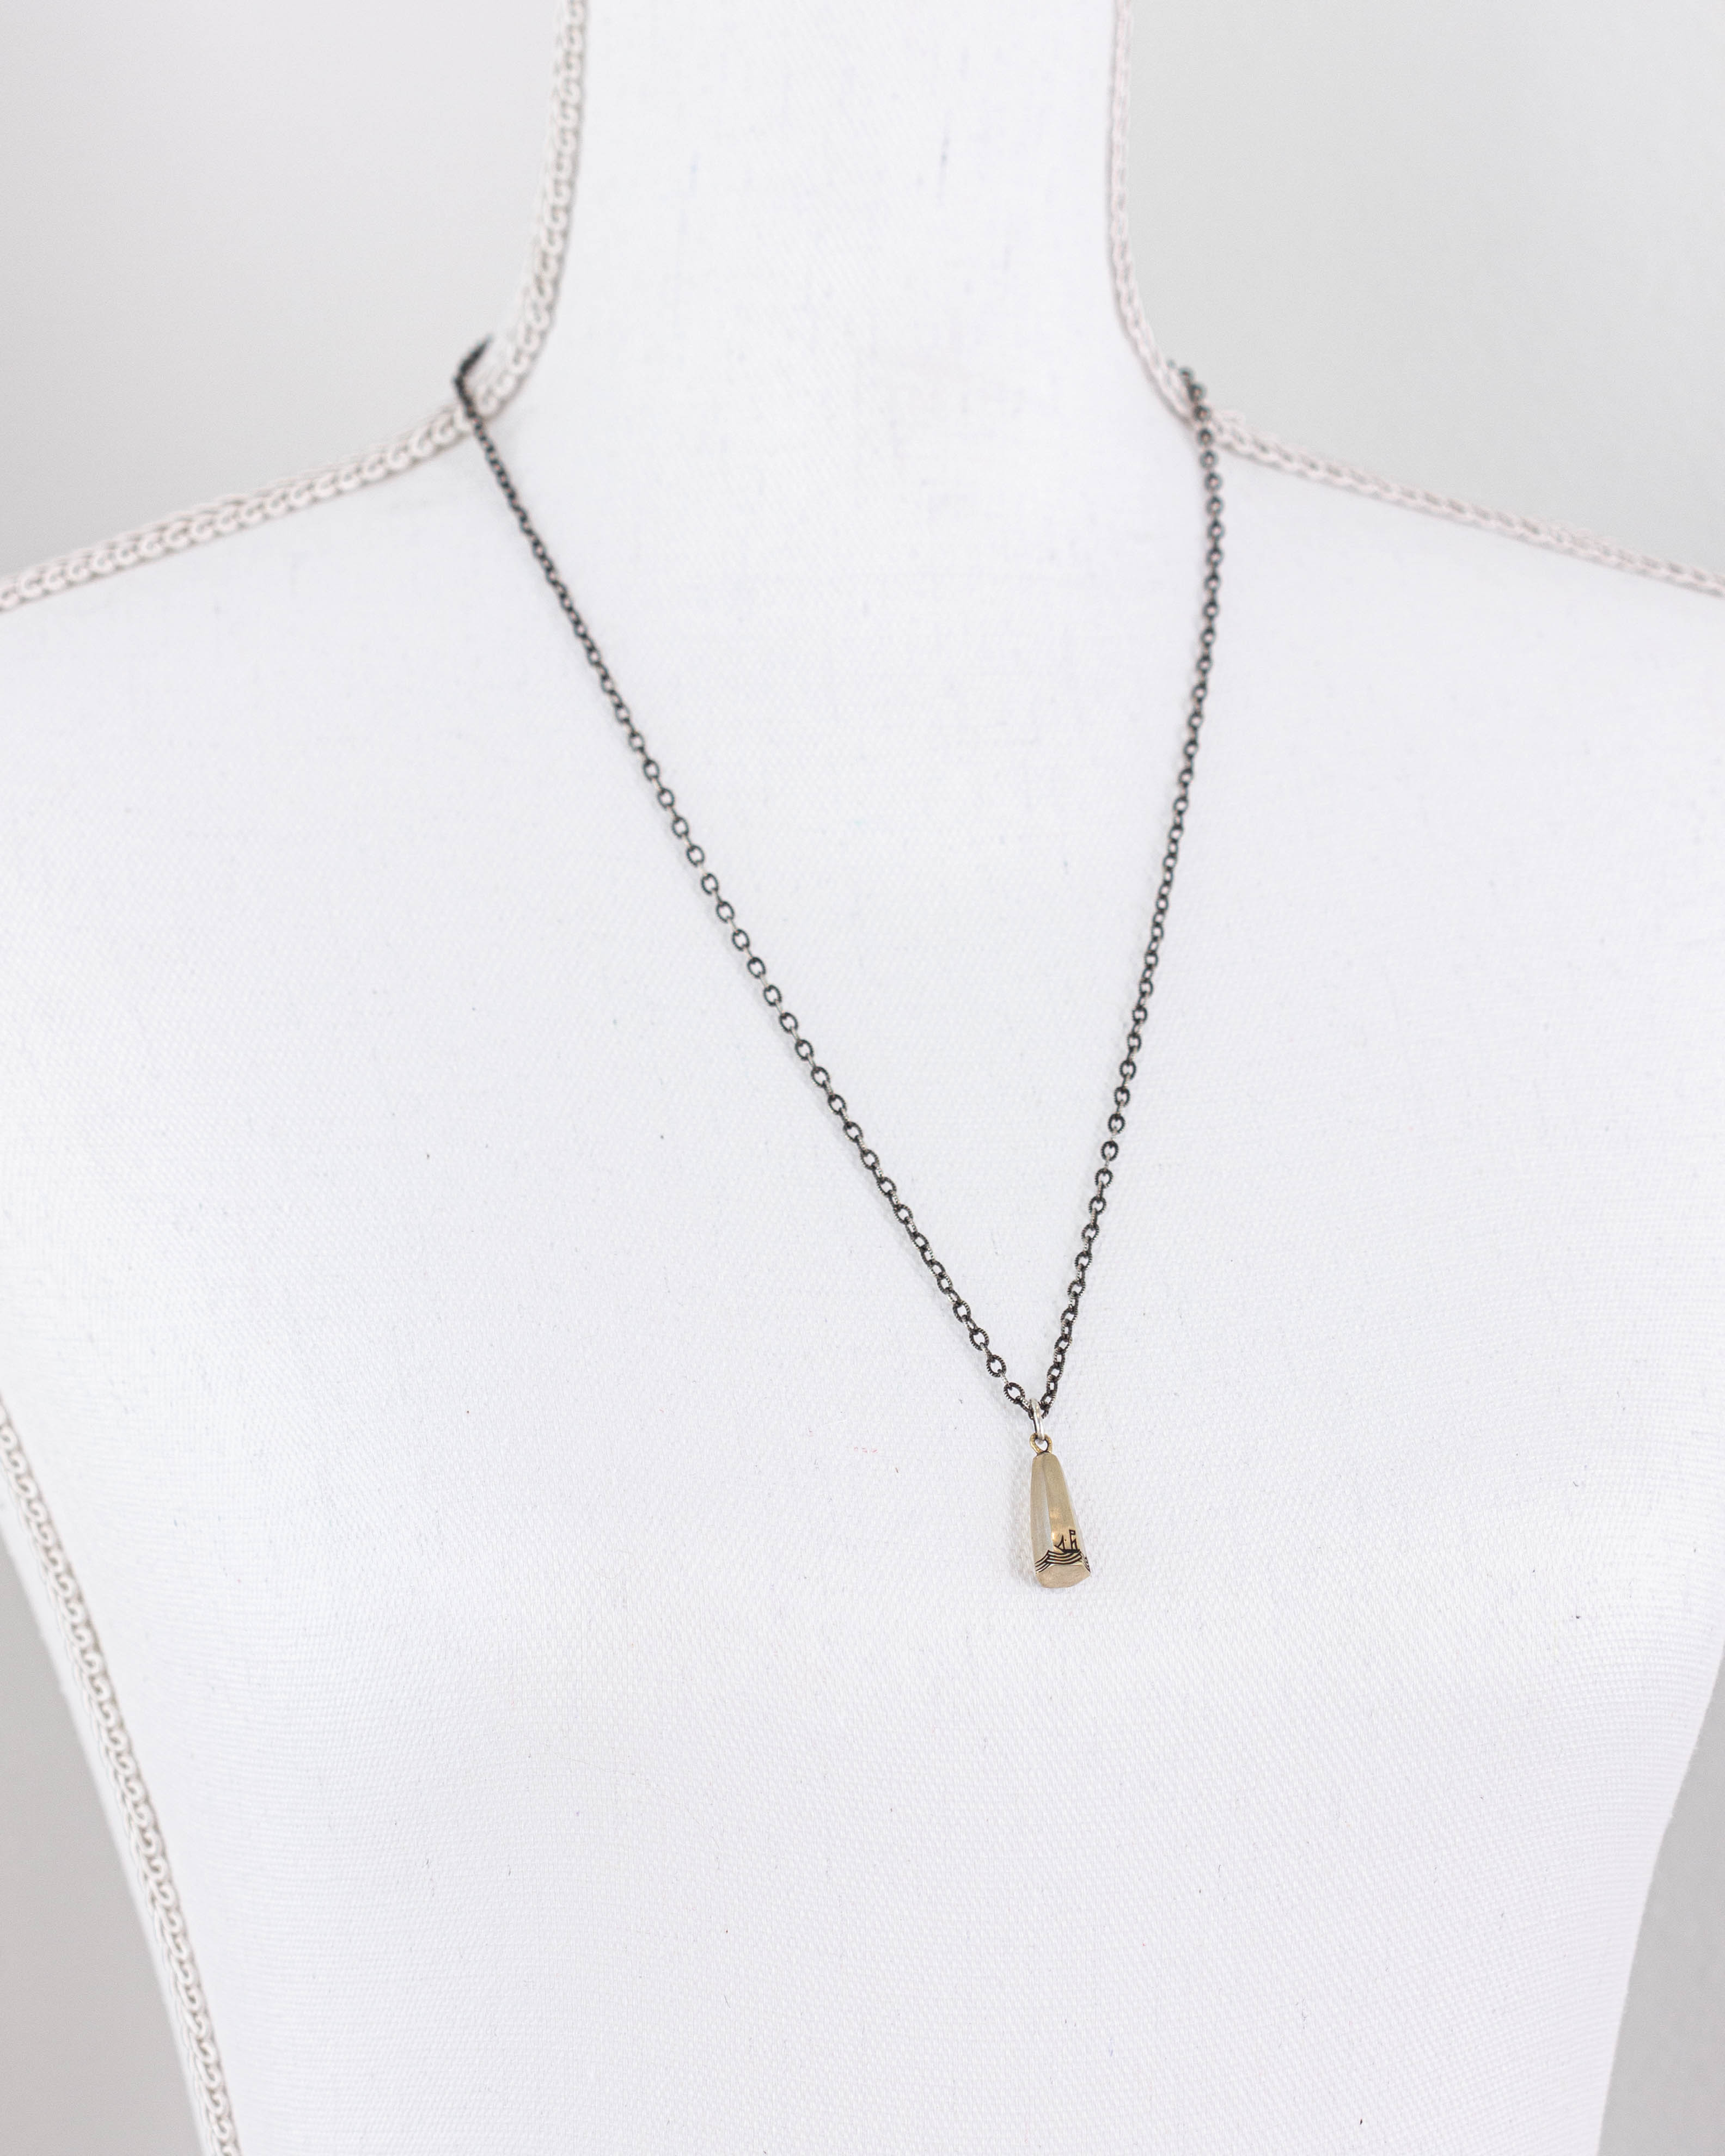 Sounding Weight Necklace in Silver & Brass